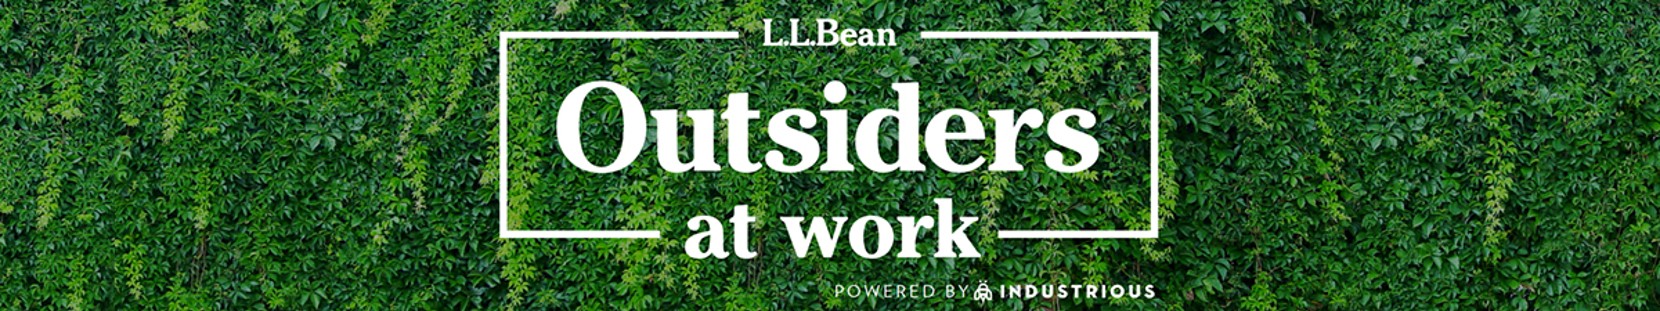 L.L.Bean Outsiders at work. 